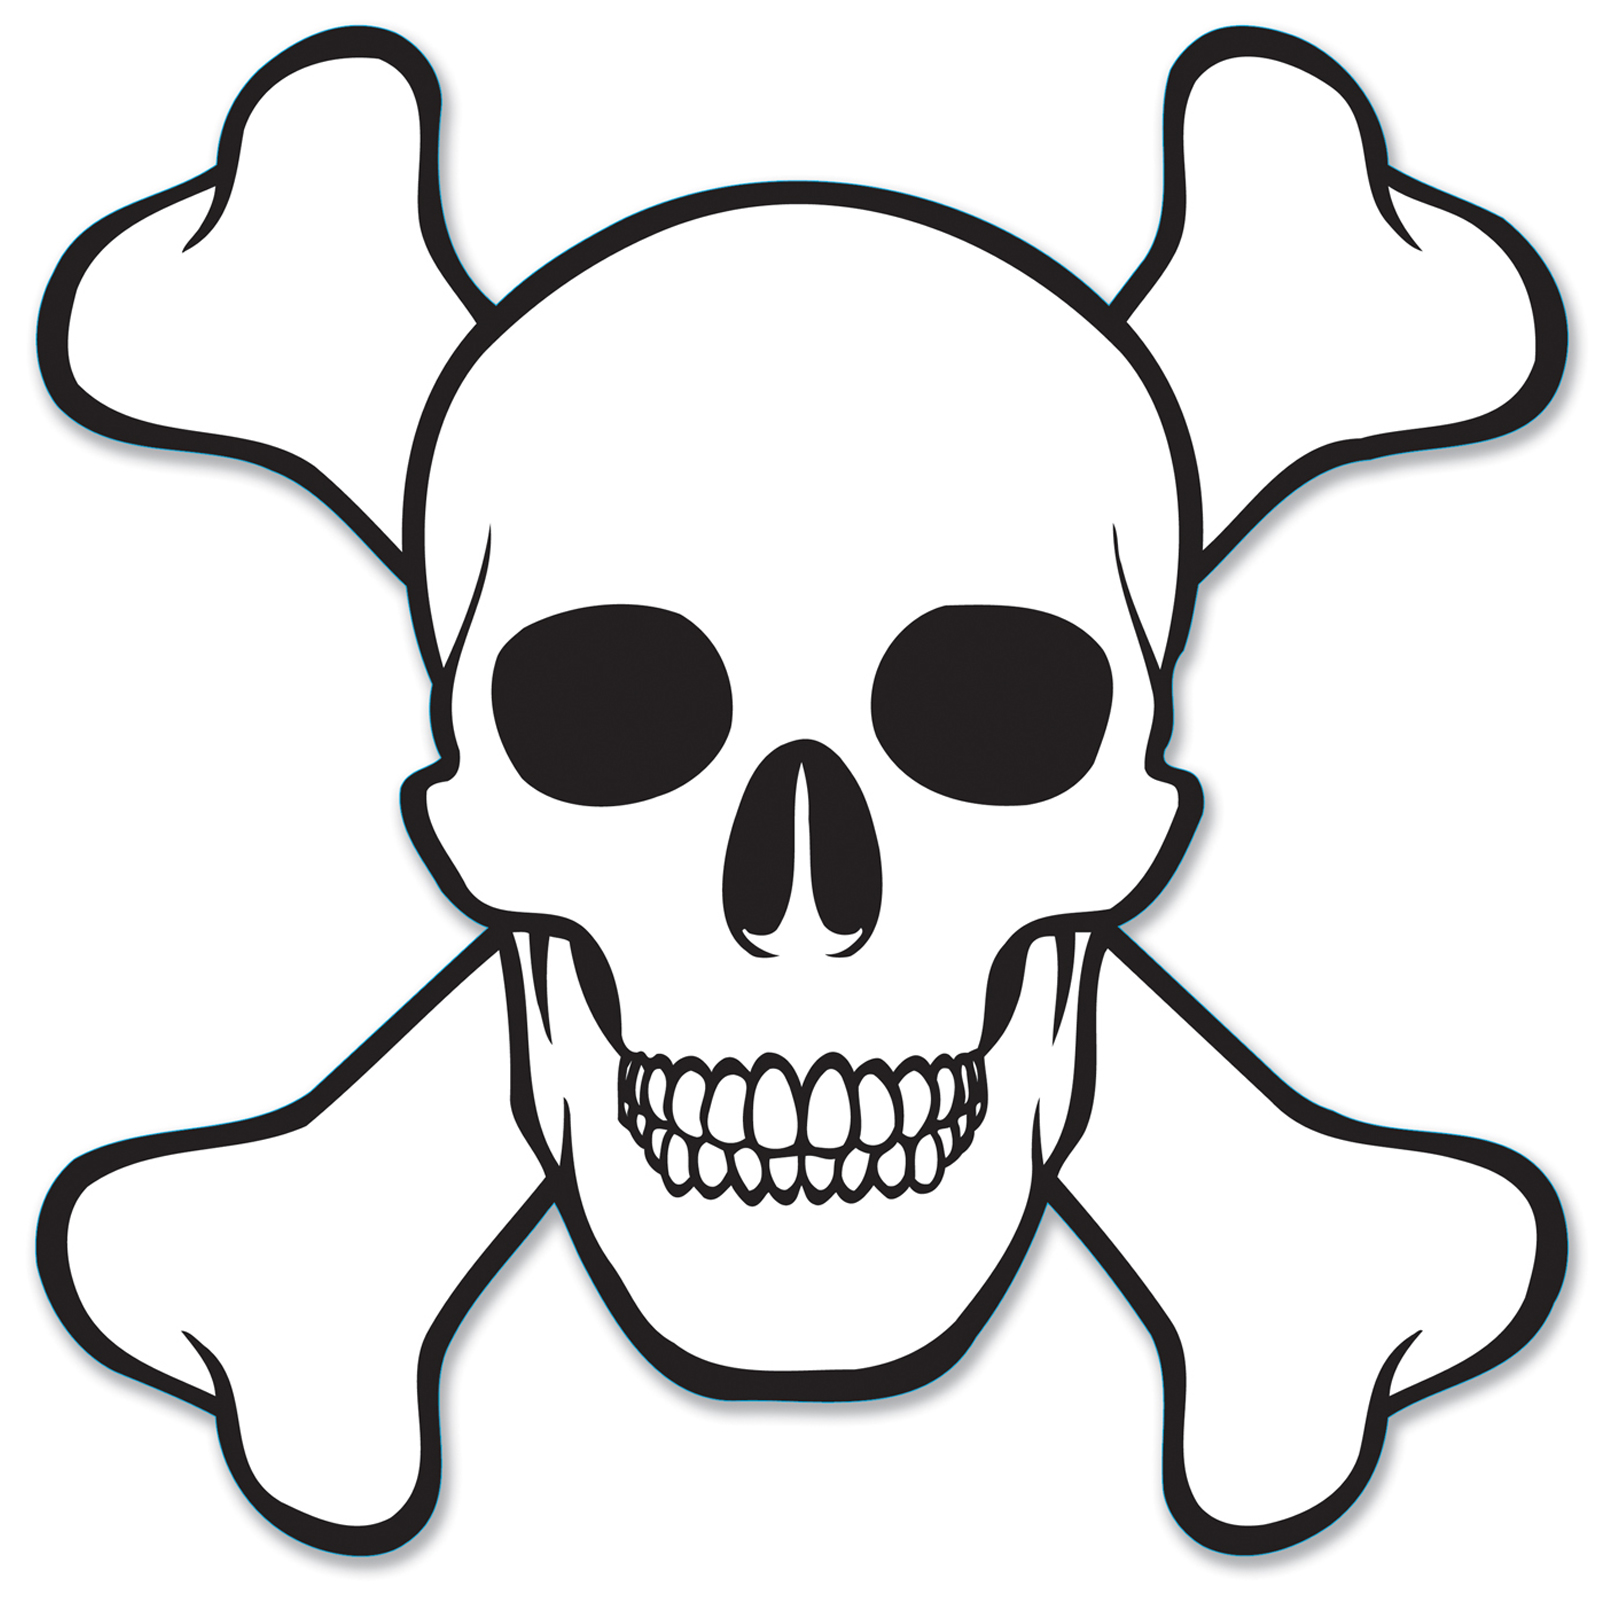 SIMPLE SKULL AND CROSSBONES CLIPART - ClipArt Best